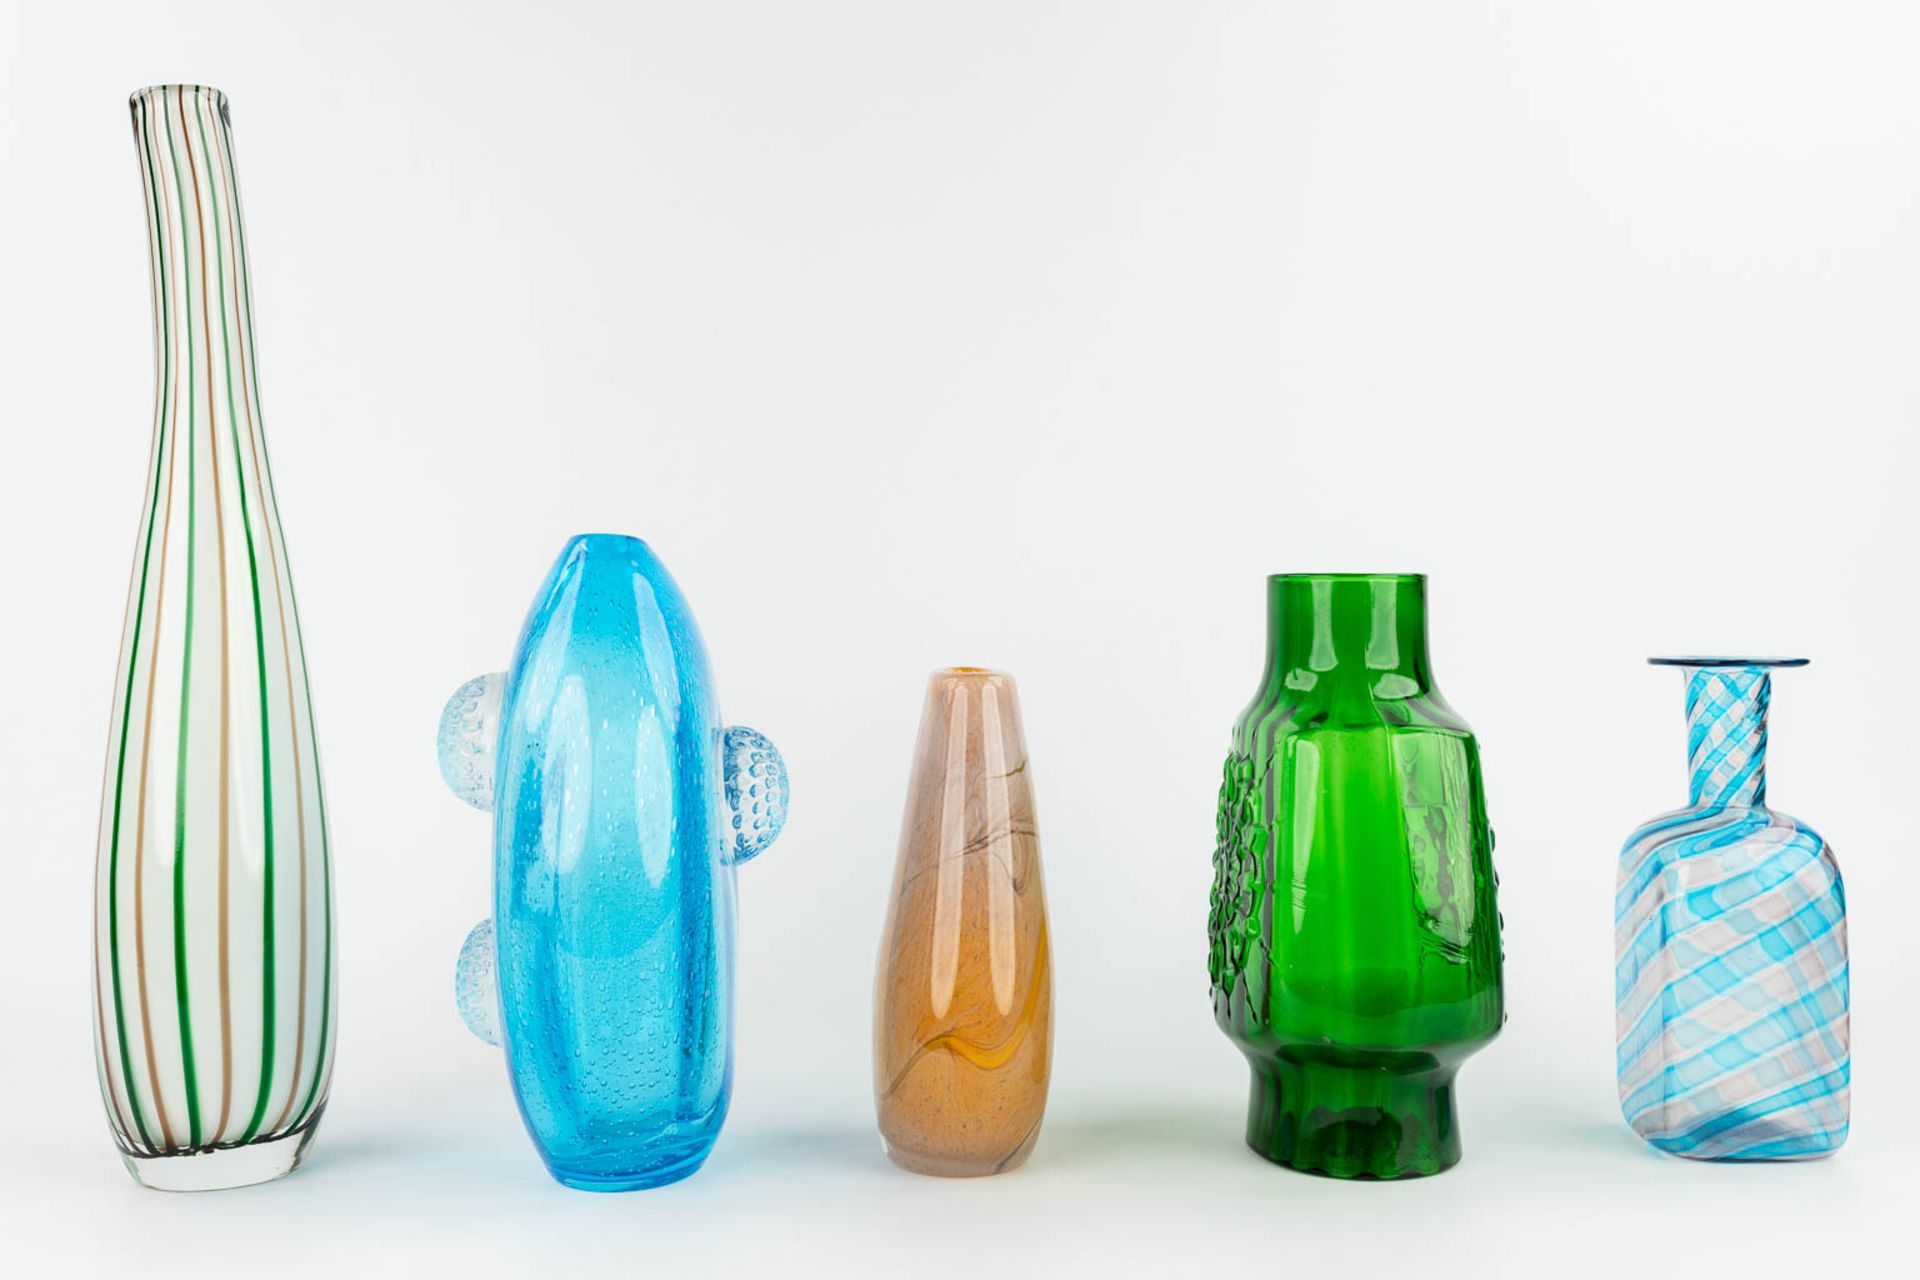 A collection of 5 glass vases, made in Murano, Italy and Scandinavia. (H: 45 x D: 10 cm) - Image 4 of 13